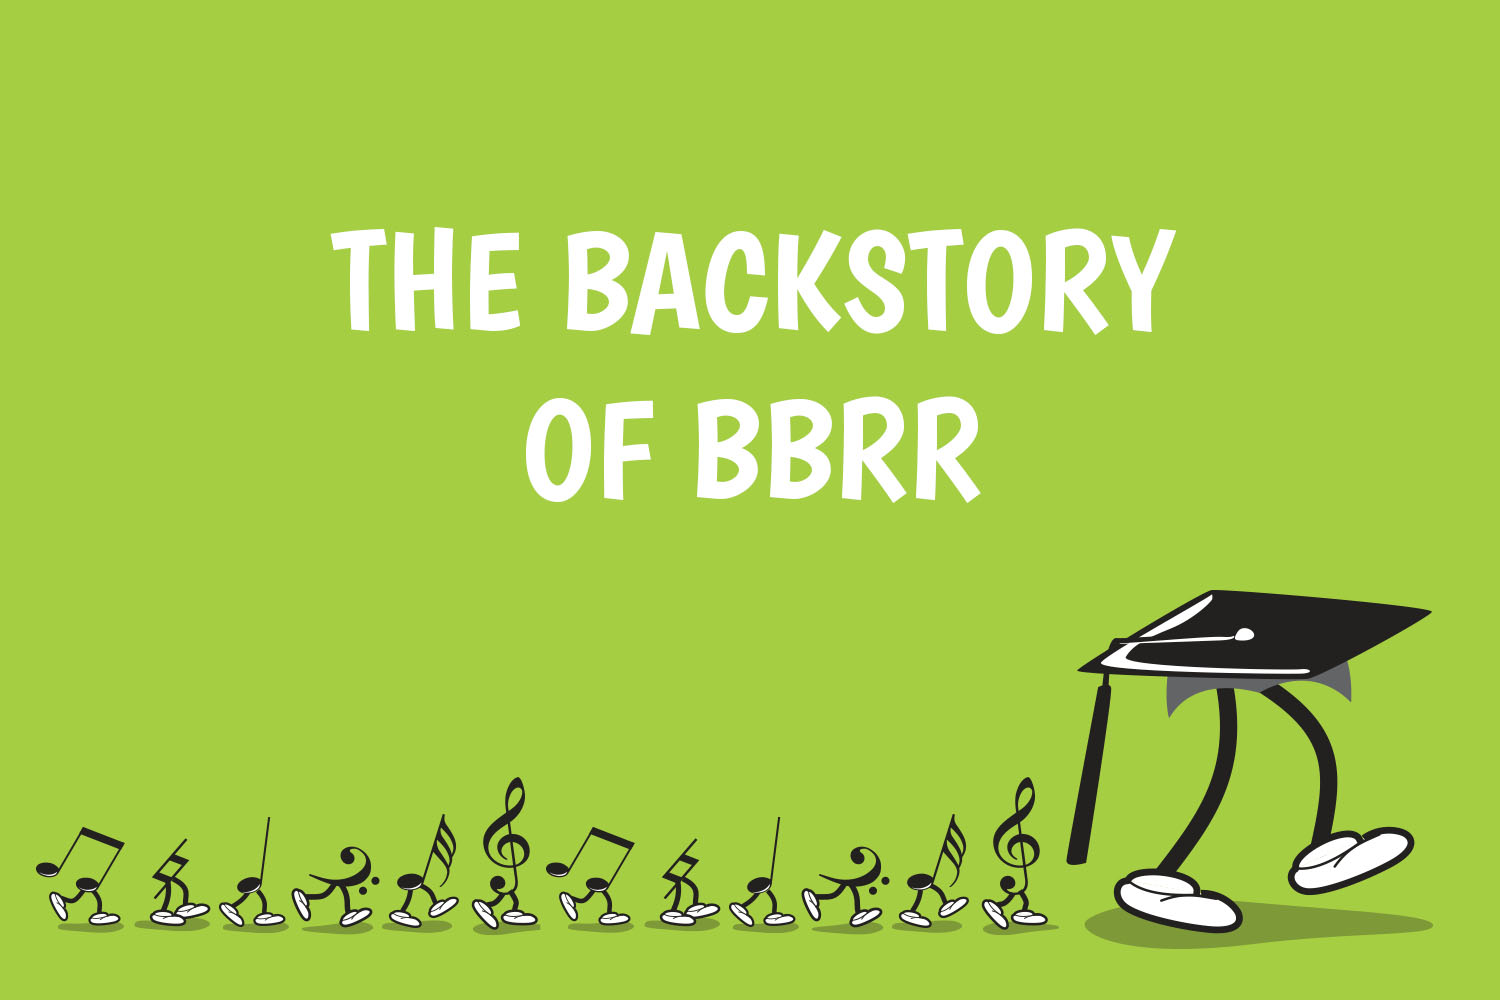 The Backstory of BBRR